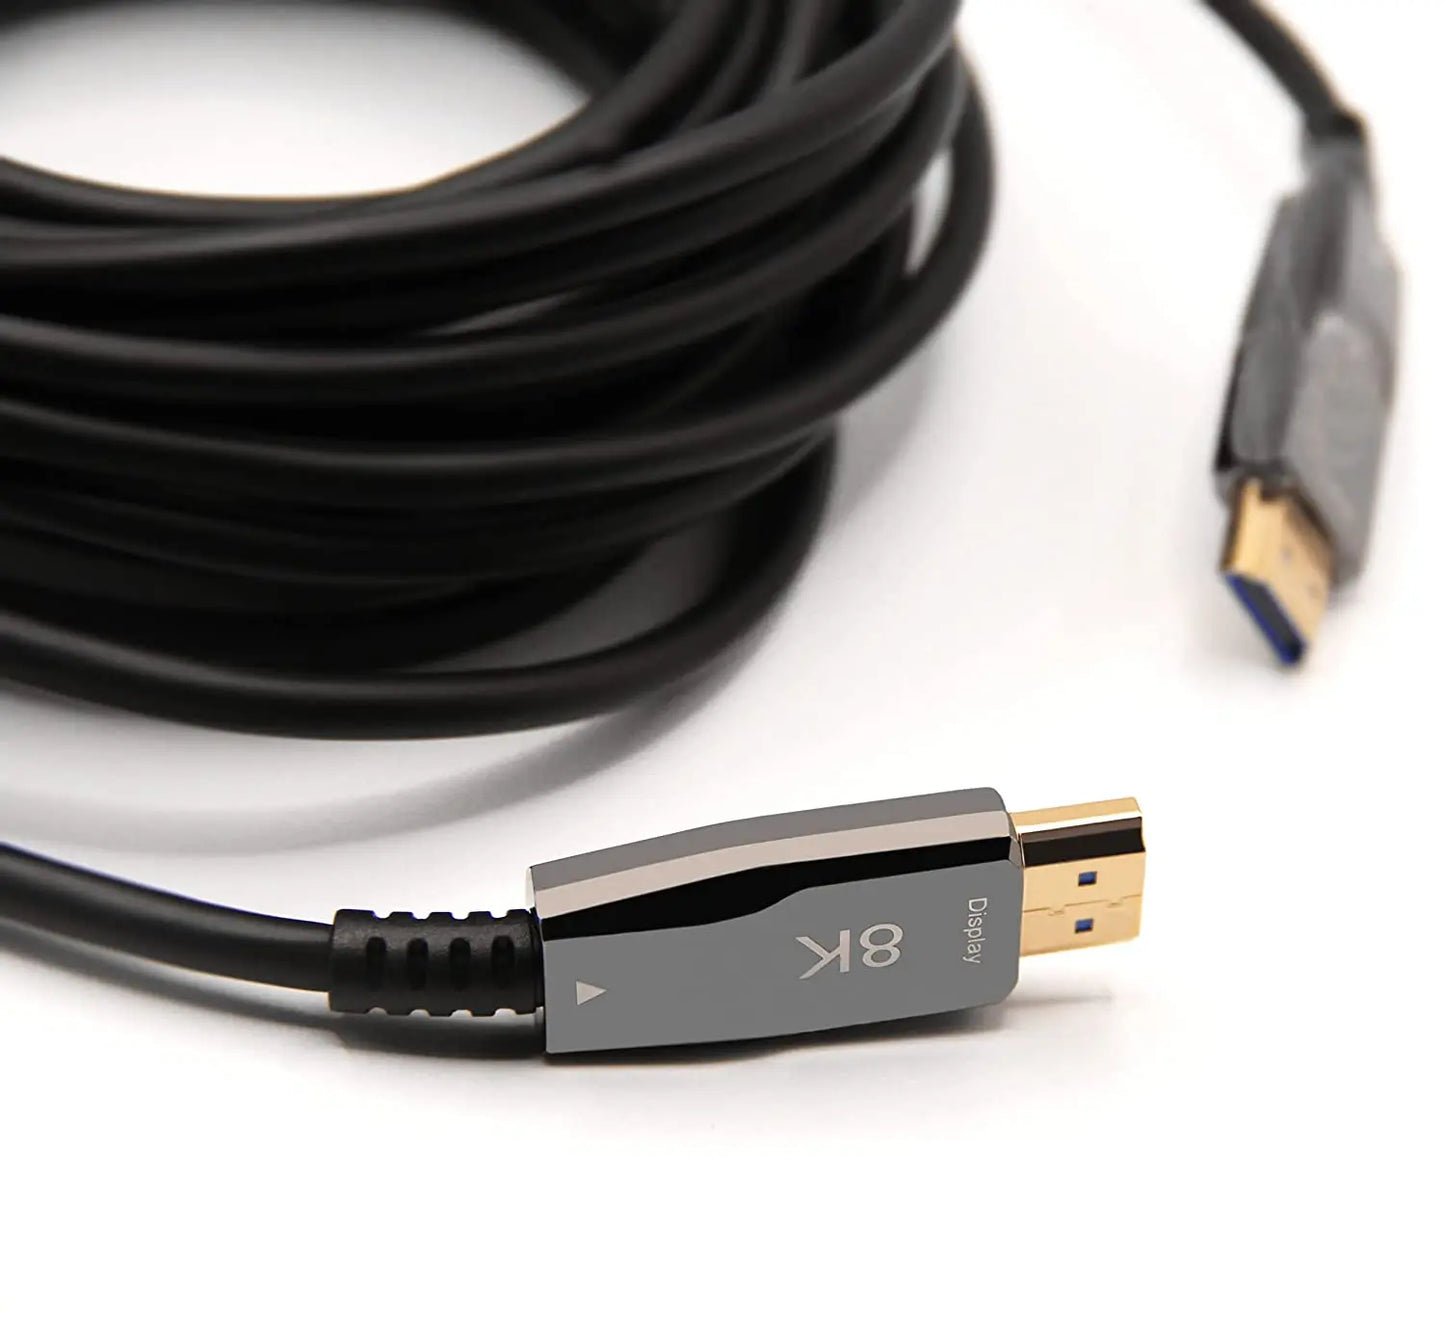 AUBEAMTO CL3 8K Fiber Optic HDMI 2.1 Cable 16Feet, Supports Ultra